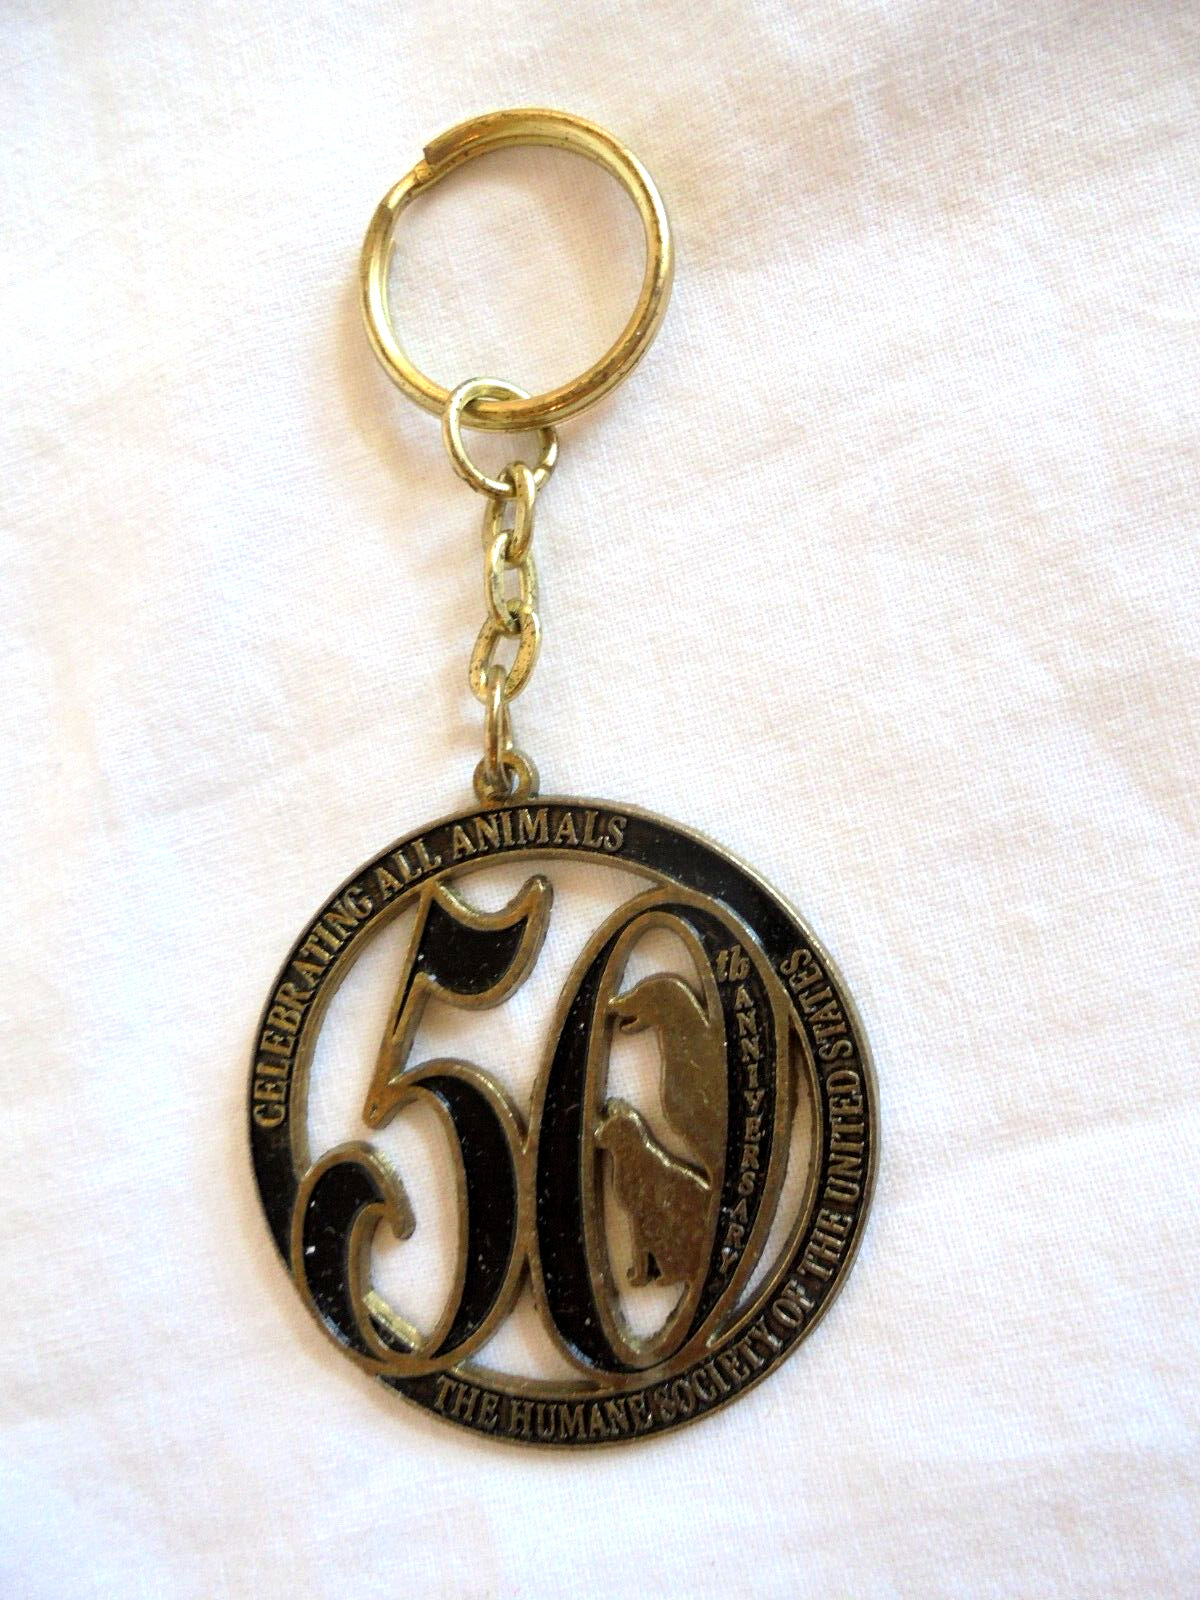 Vintage Humane Society of the United States 50th Anniversary Keychain